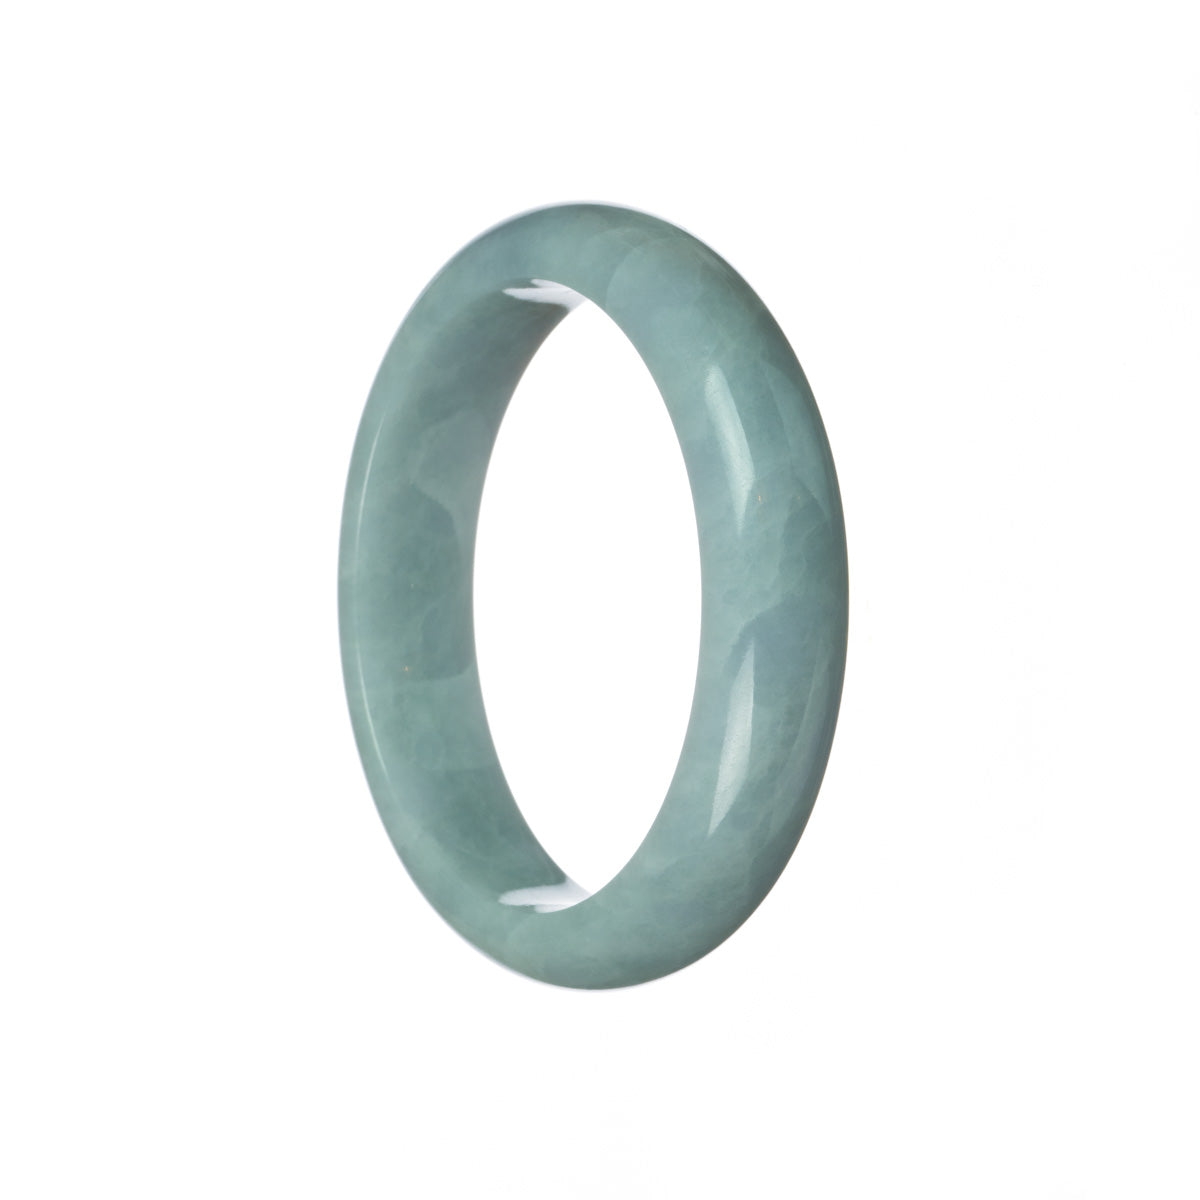 A close-up image of a lavender Burmese jade bangle bracelet, with a Type A certification. The bracelet is shaped like a half moon and has a diameter of 59mm. The brand name "MAYS" is displayed at the bottom of the image.